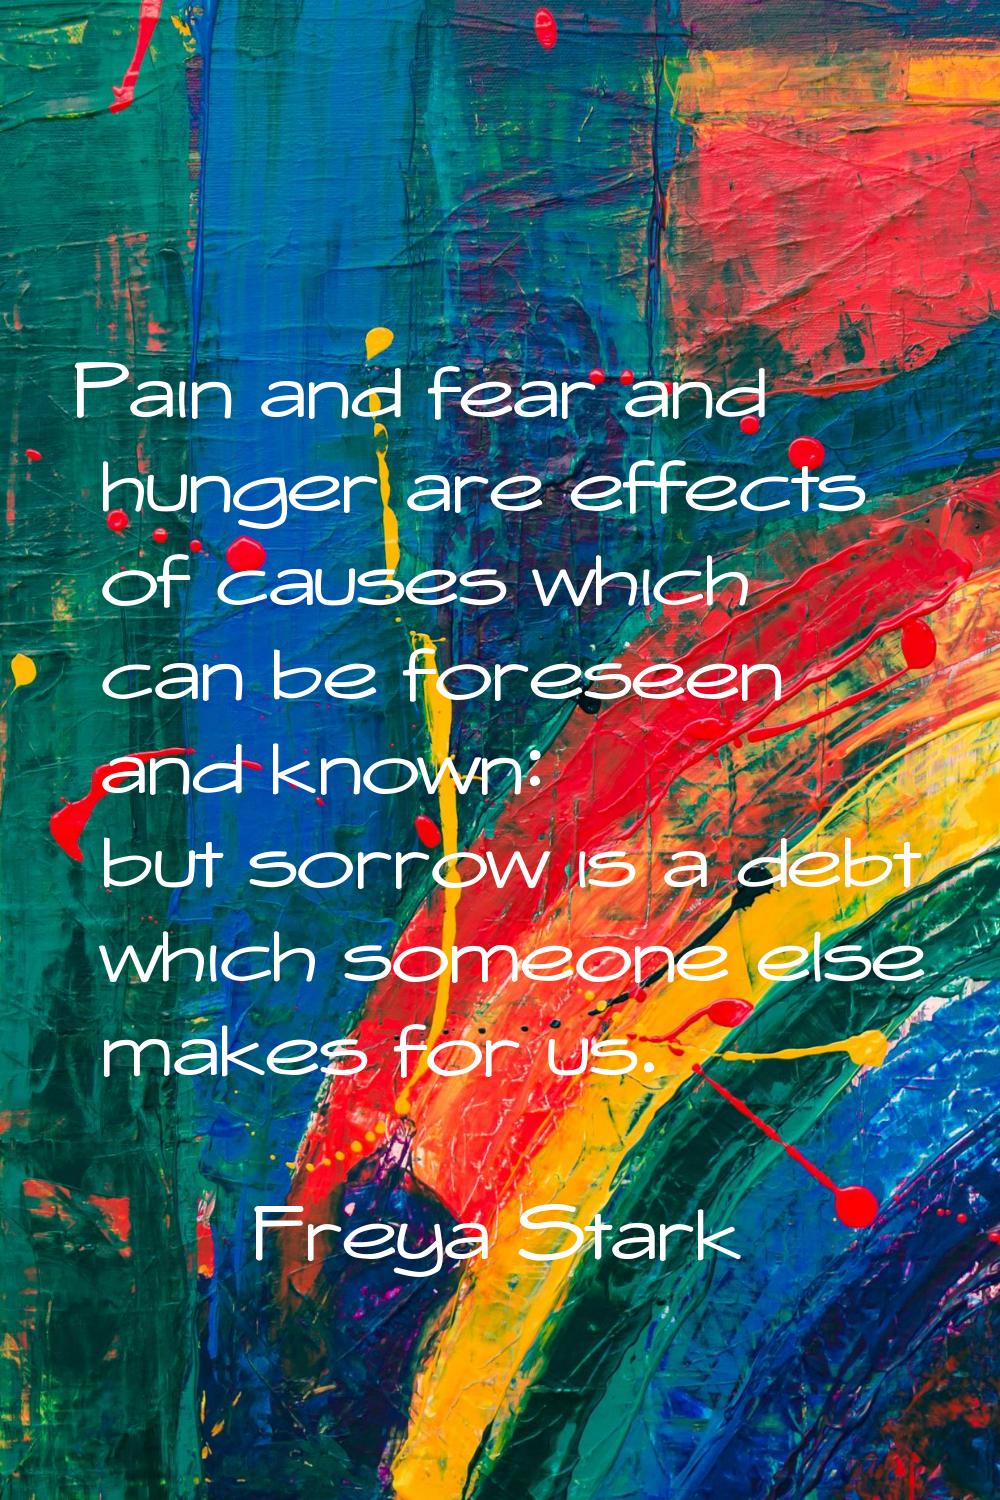 Pain and fear and hunger are effects of causes which can be foreseen and known: but sorrow is a deb